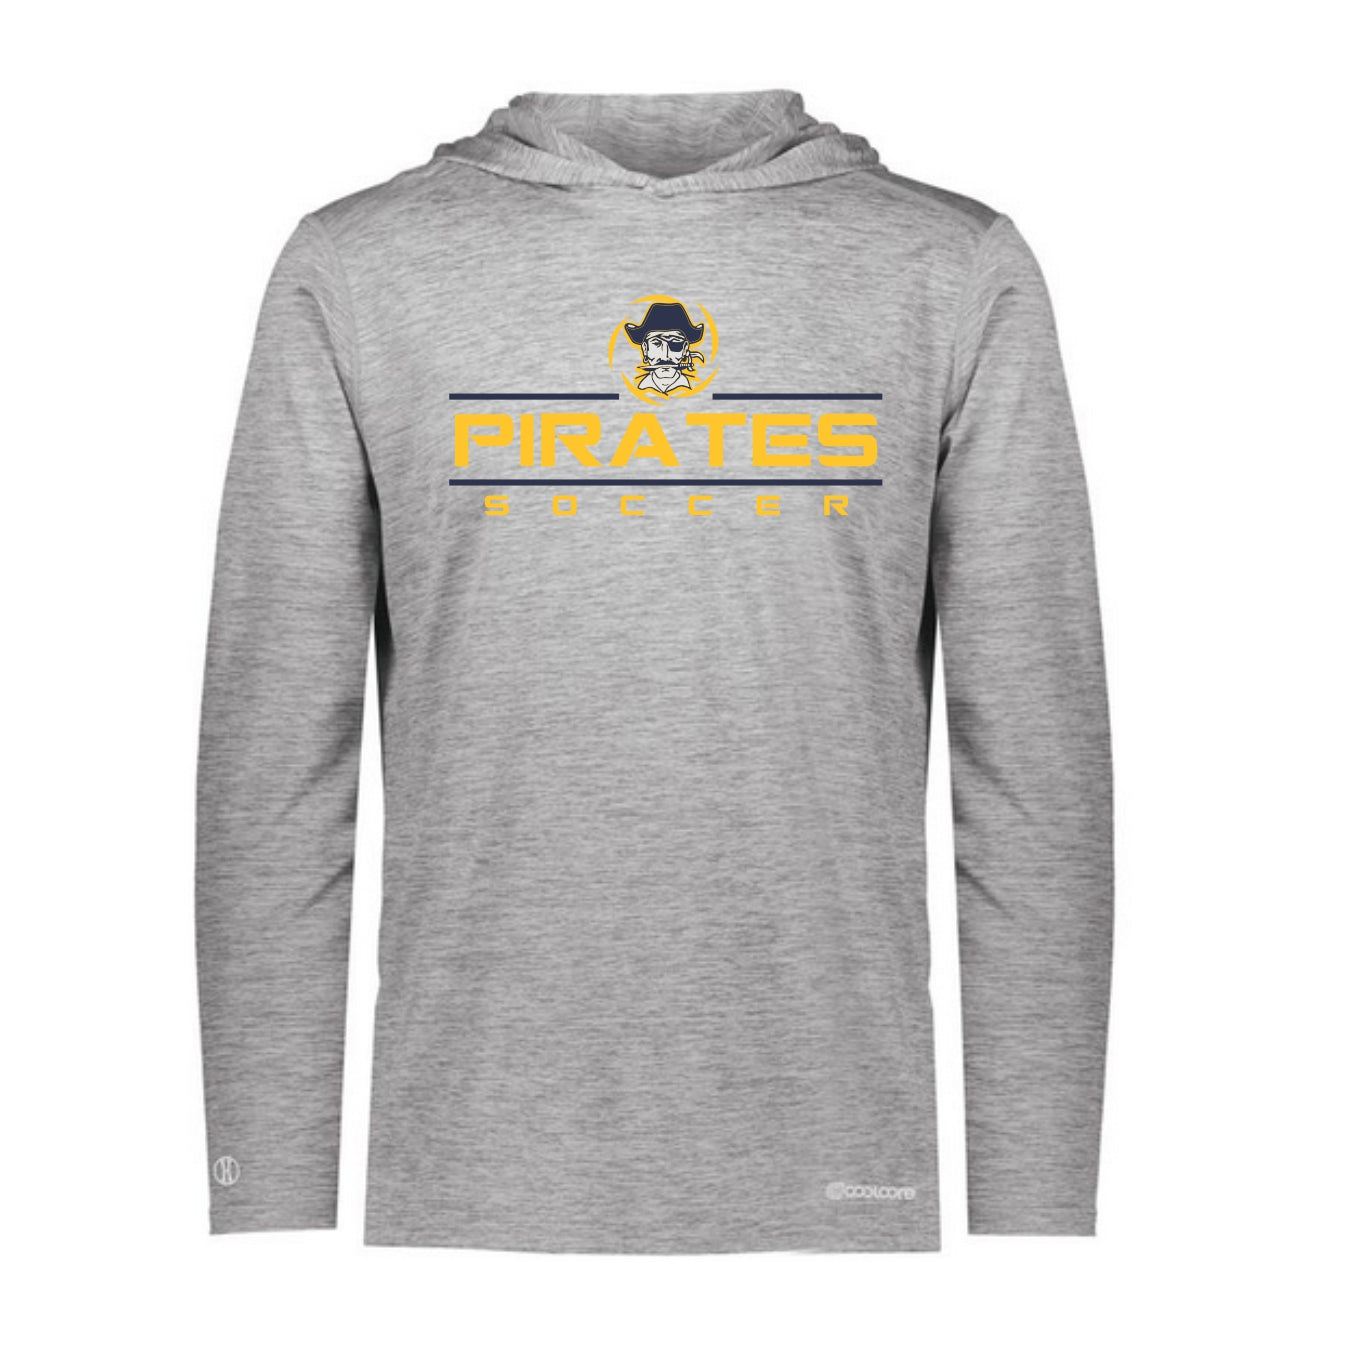 Pirate Girls Soccer -- Coolcore Hoodie -- Adult/Youth